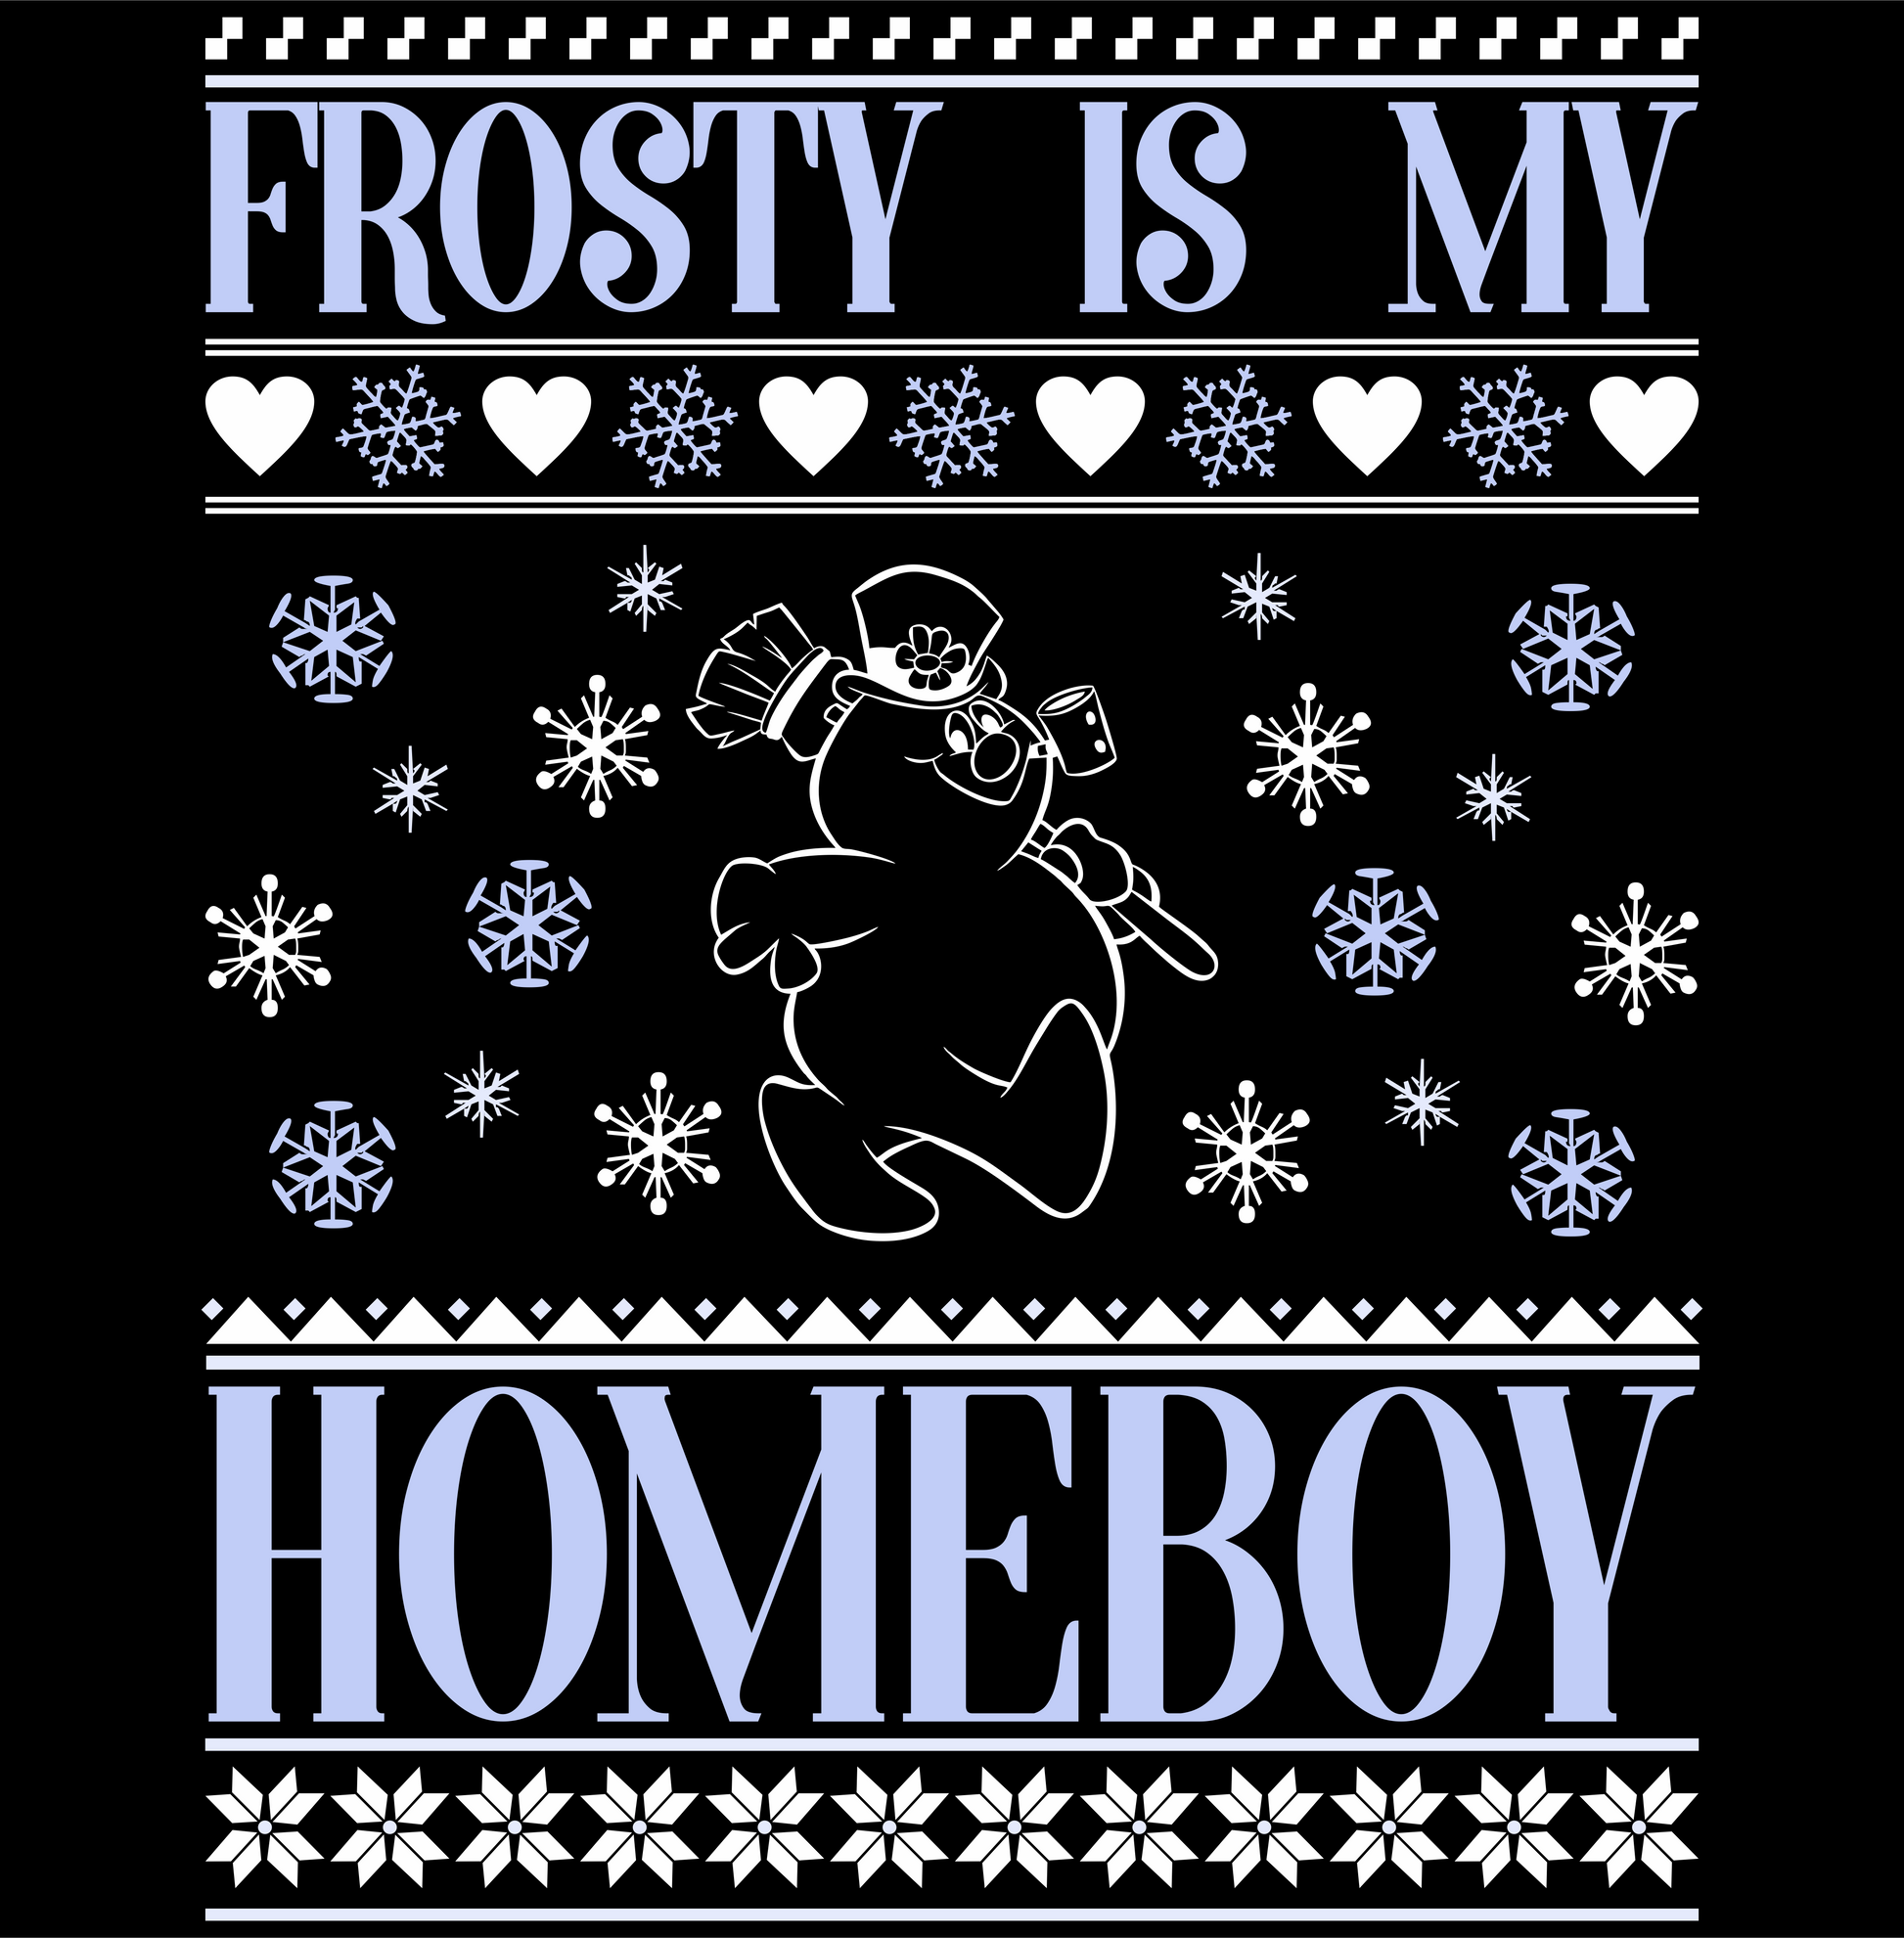 frosty is my homeboy snowman christmas sweater style DTG design graphic